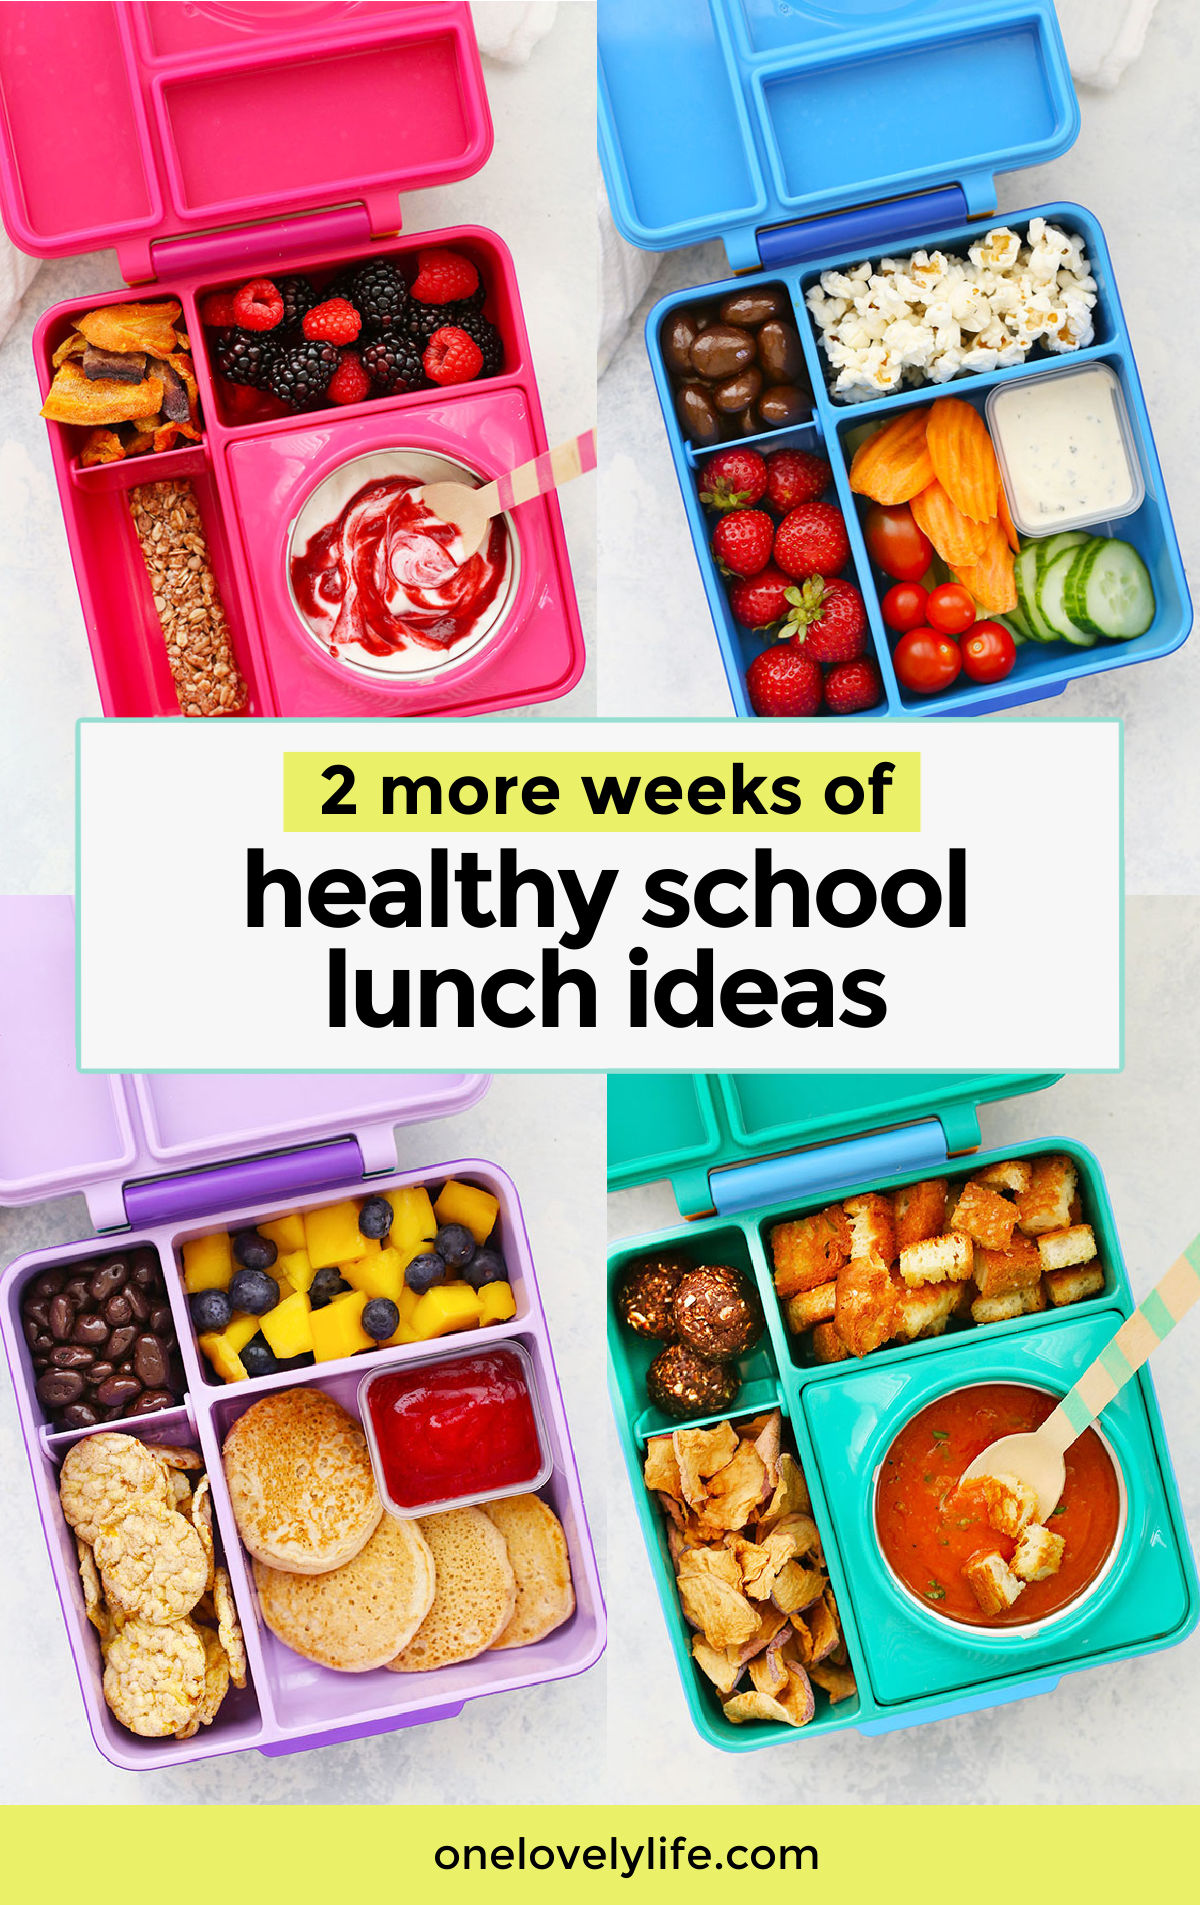 https://www.onelovelylife.com/wp-content/uploads/2020/08/2-More-Weeks-of-Healthy-School-Lunches-Pin1C.jpg